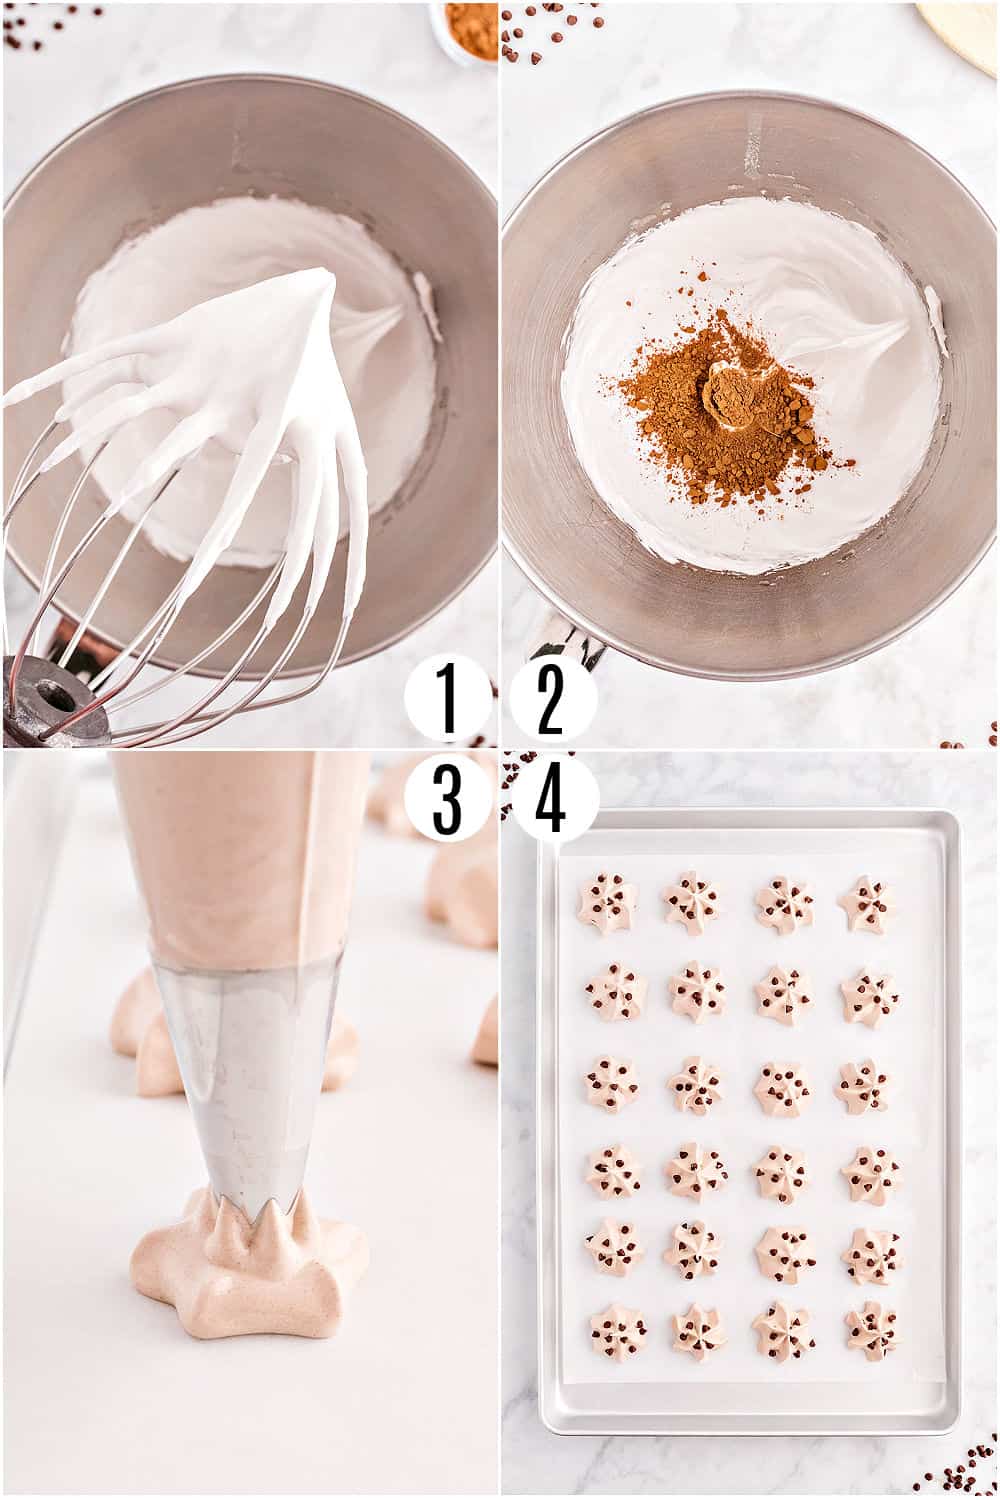 Step by step photos showing how to make chocolate meringue cookies.